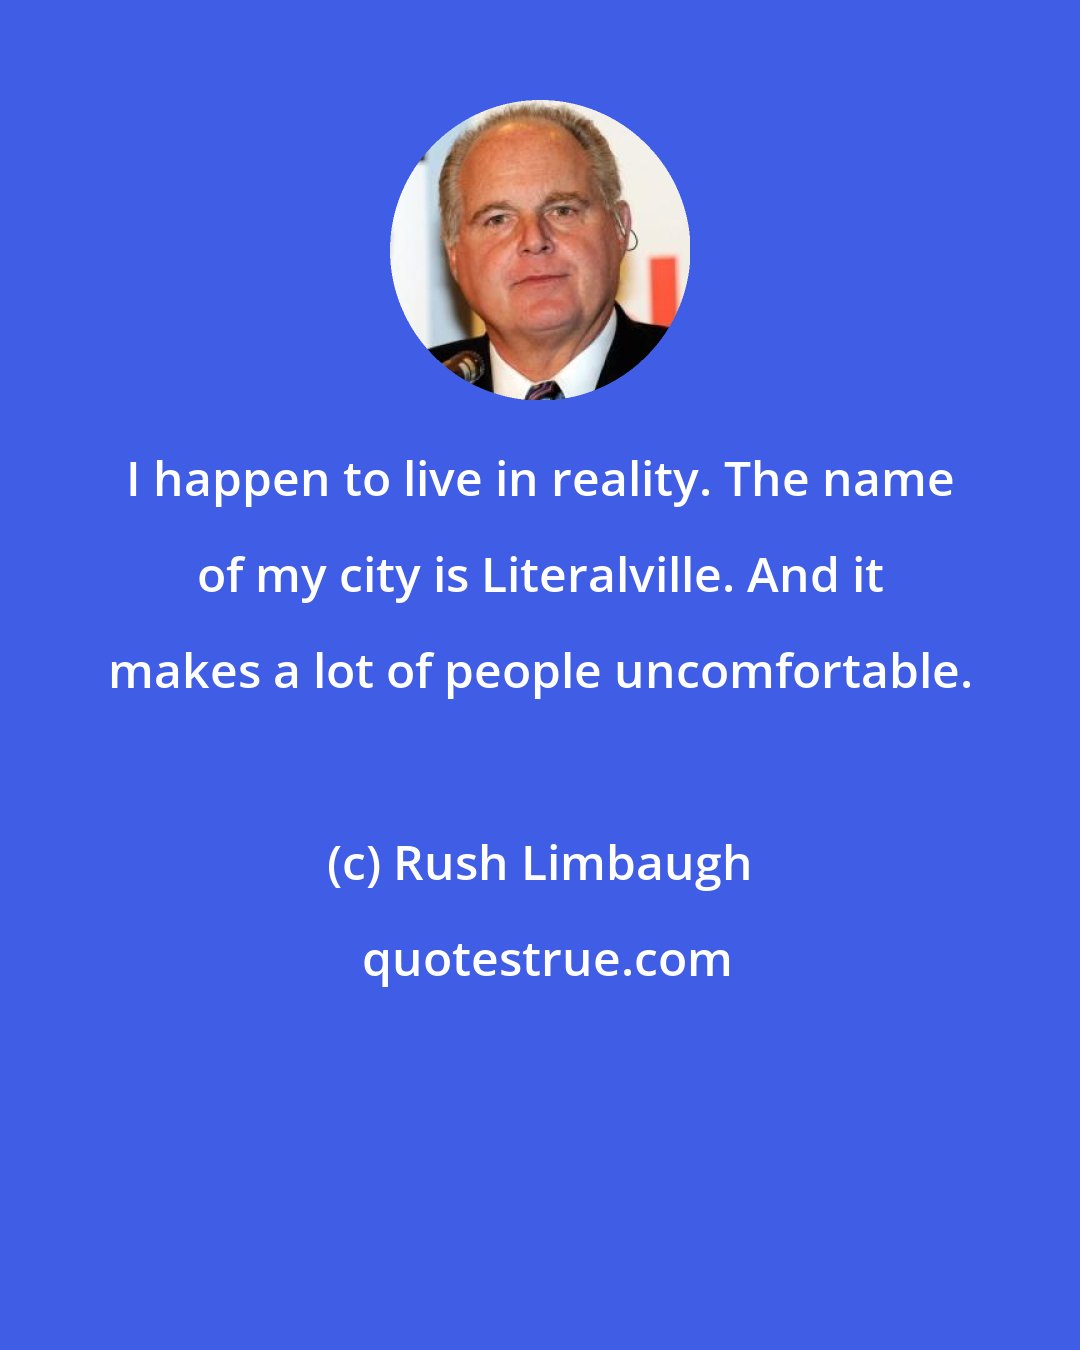 Rush Limbaugh: I happen to live in reality. The name of my city is Literalville. And it makes a lot of people uncomfortable.